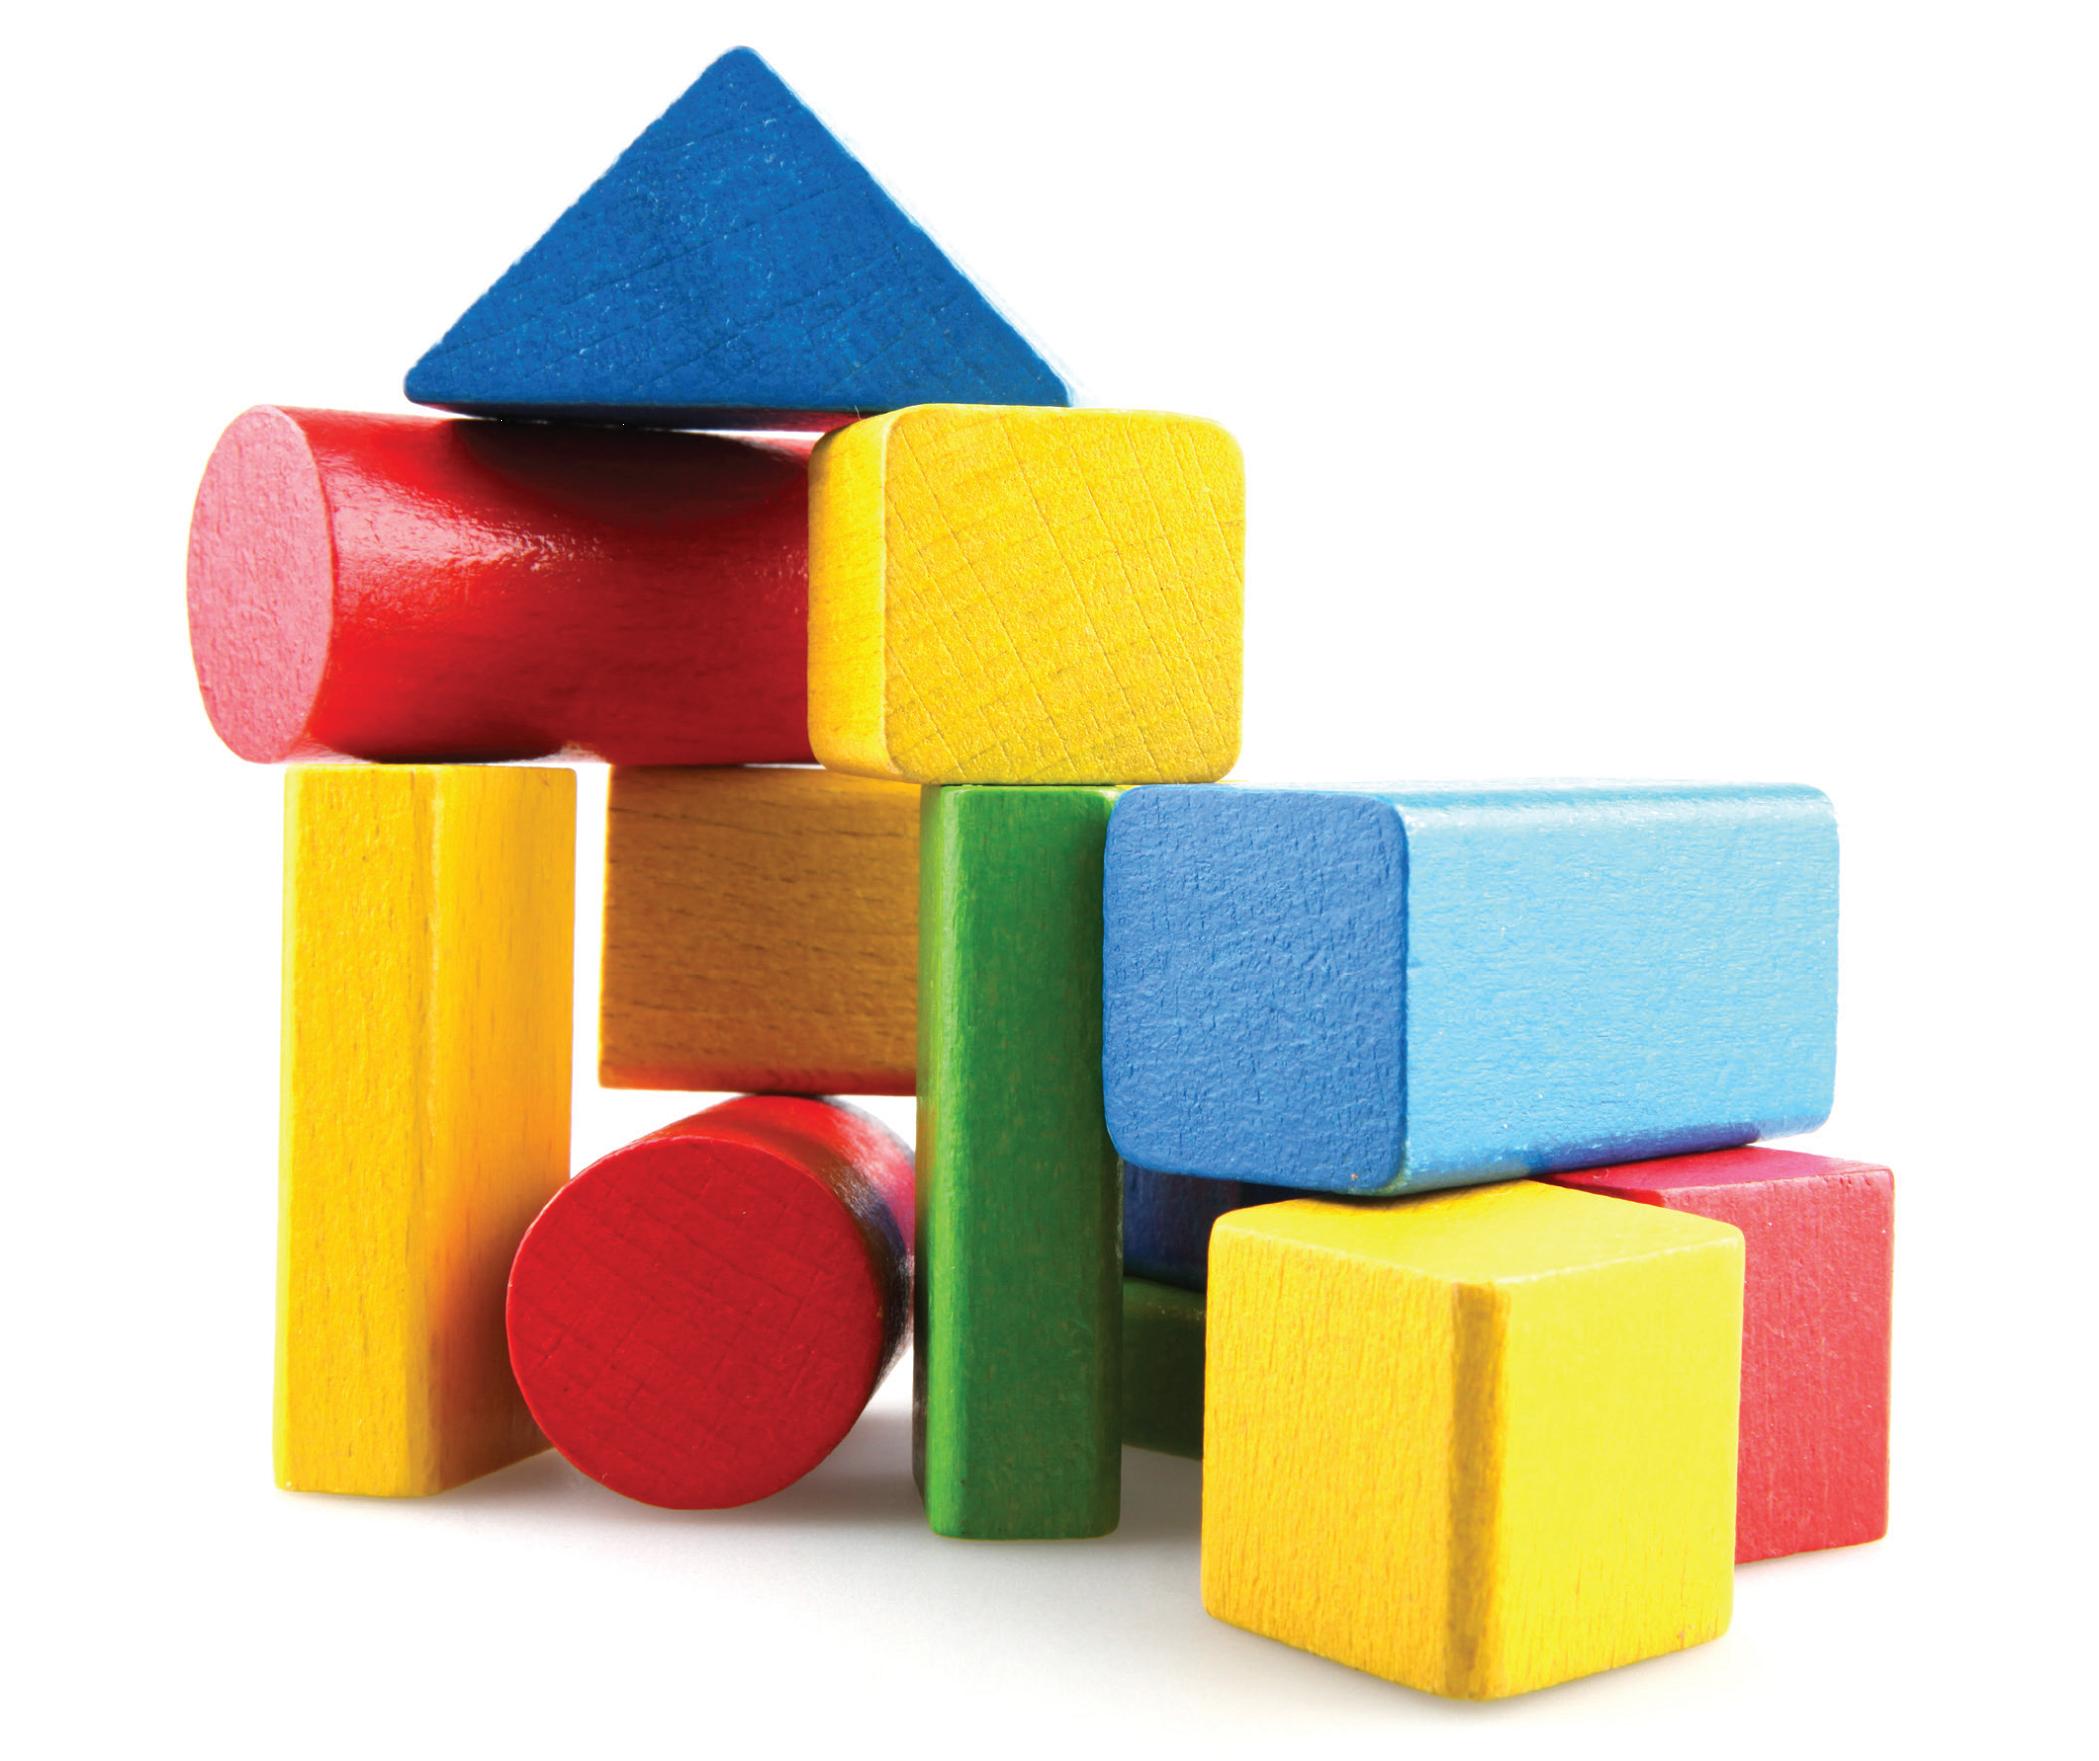 A group of wooden blocks in various shapes and colors